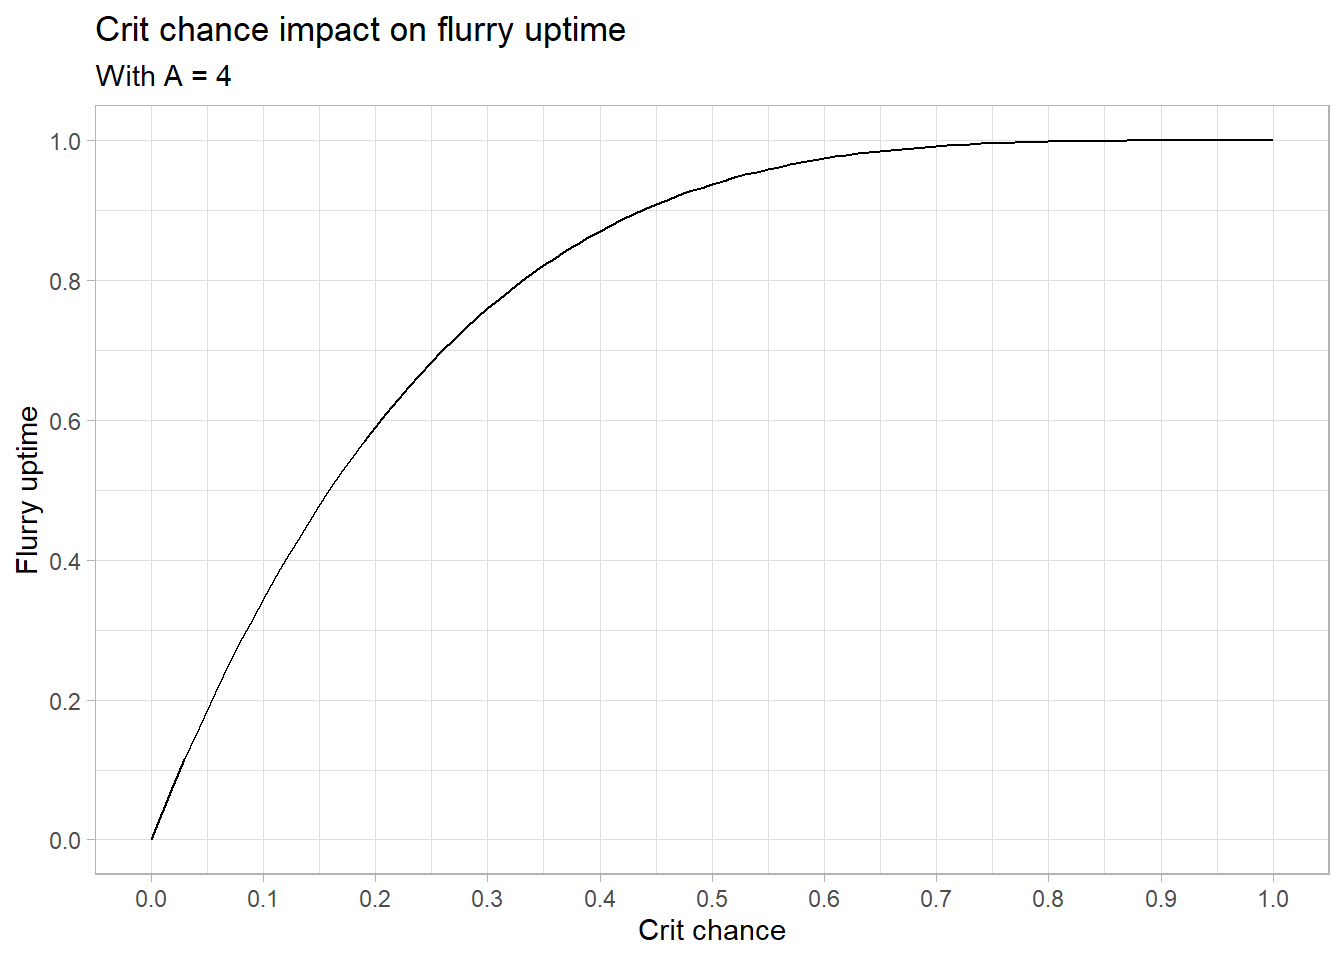 Increase in critical strike chance increases flurry uptime.